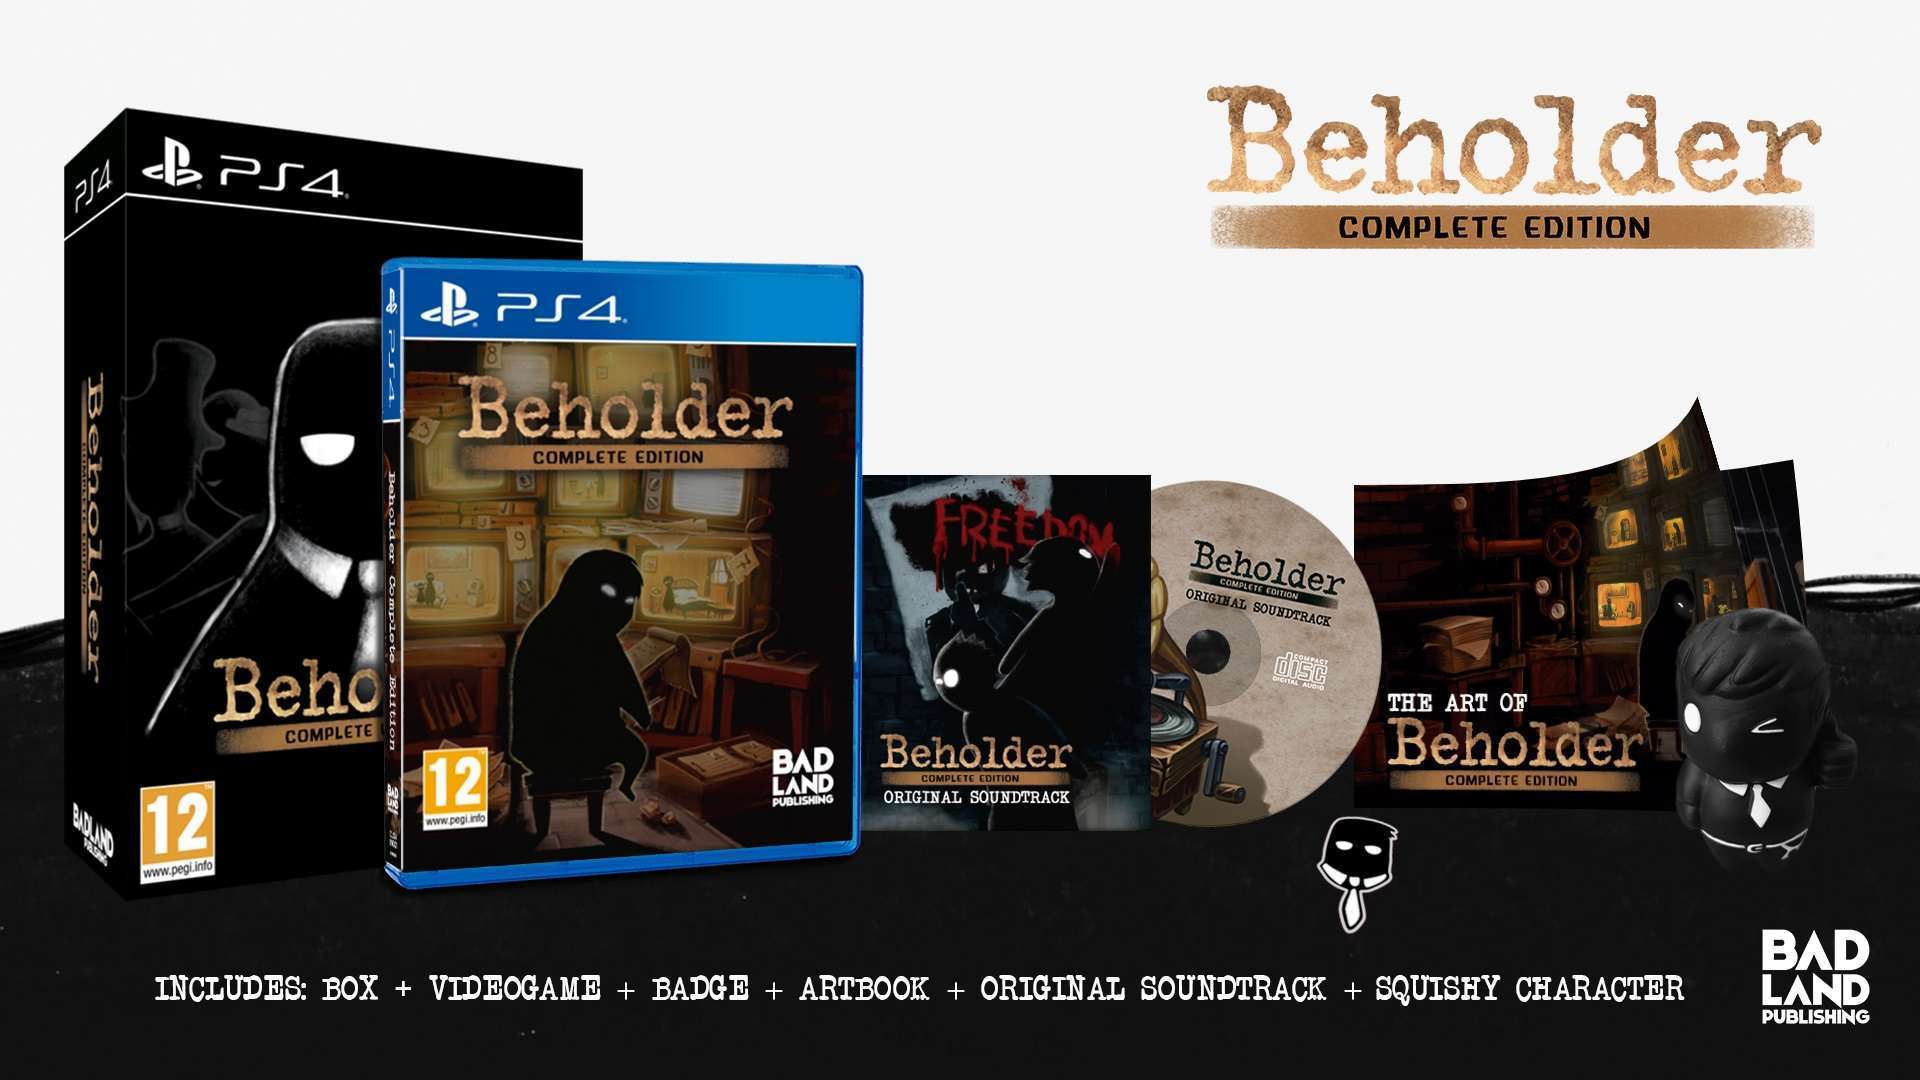 BEHOLDER: Complete Edition Physical Version Available Now for PlayStation 4